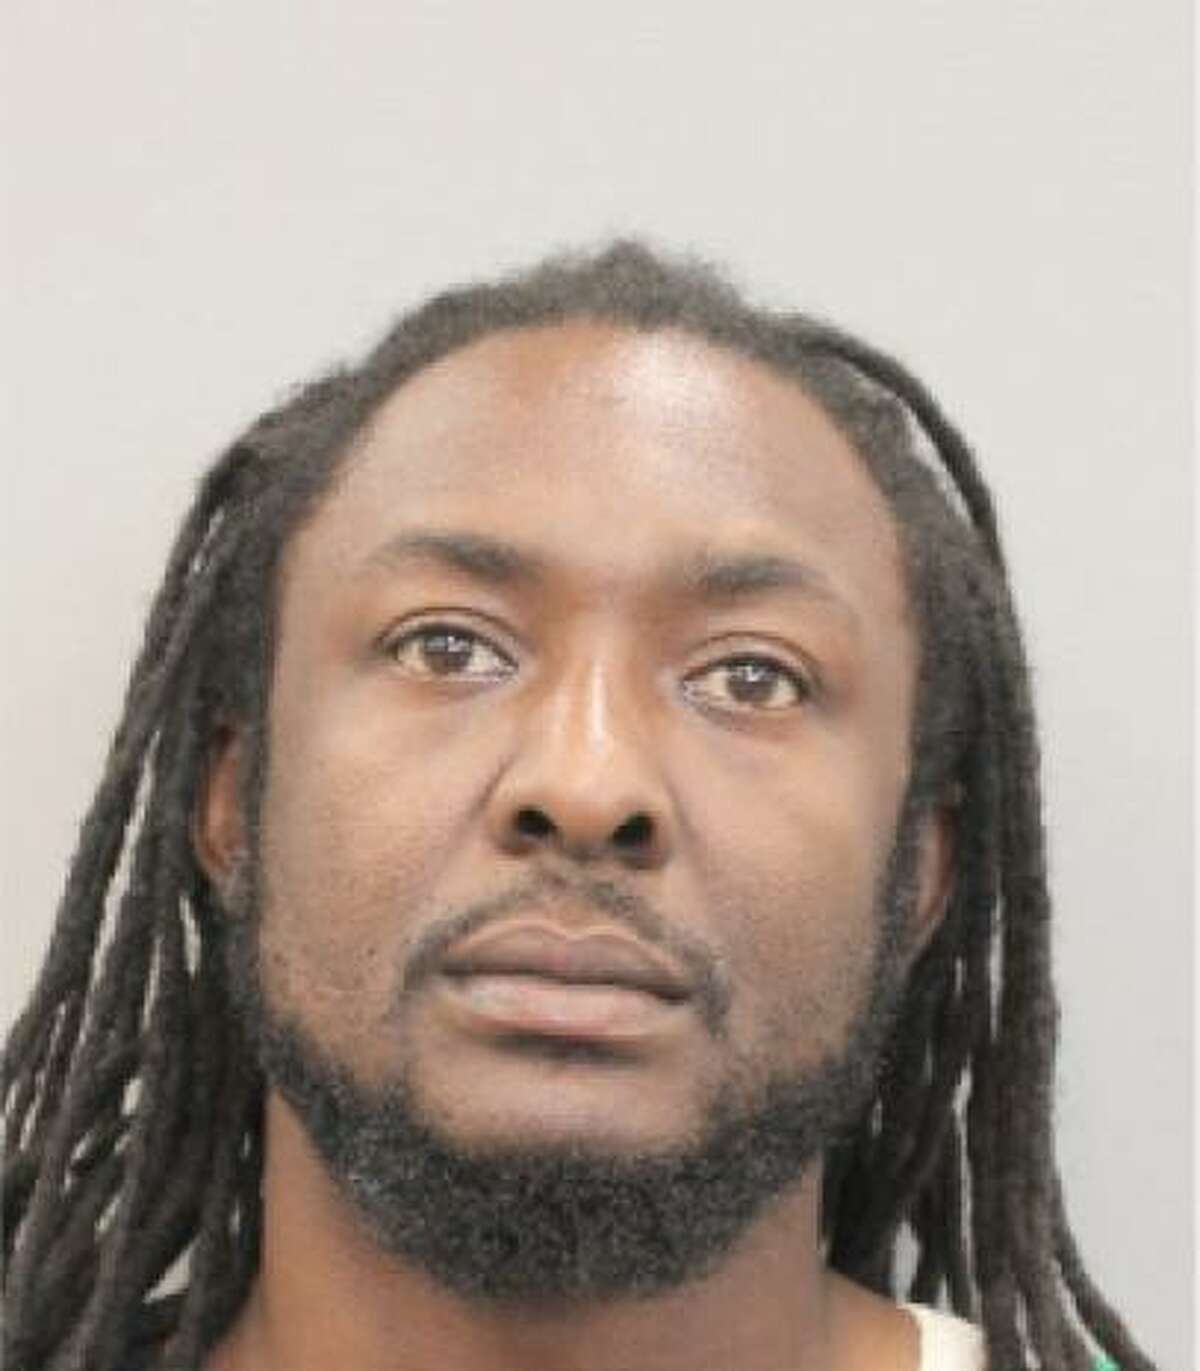 Cardell J. Bassue, 38, is wanted on a felony theft charge allegedly committed at a Conroe car dealership.